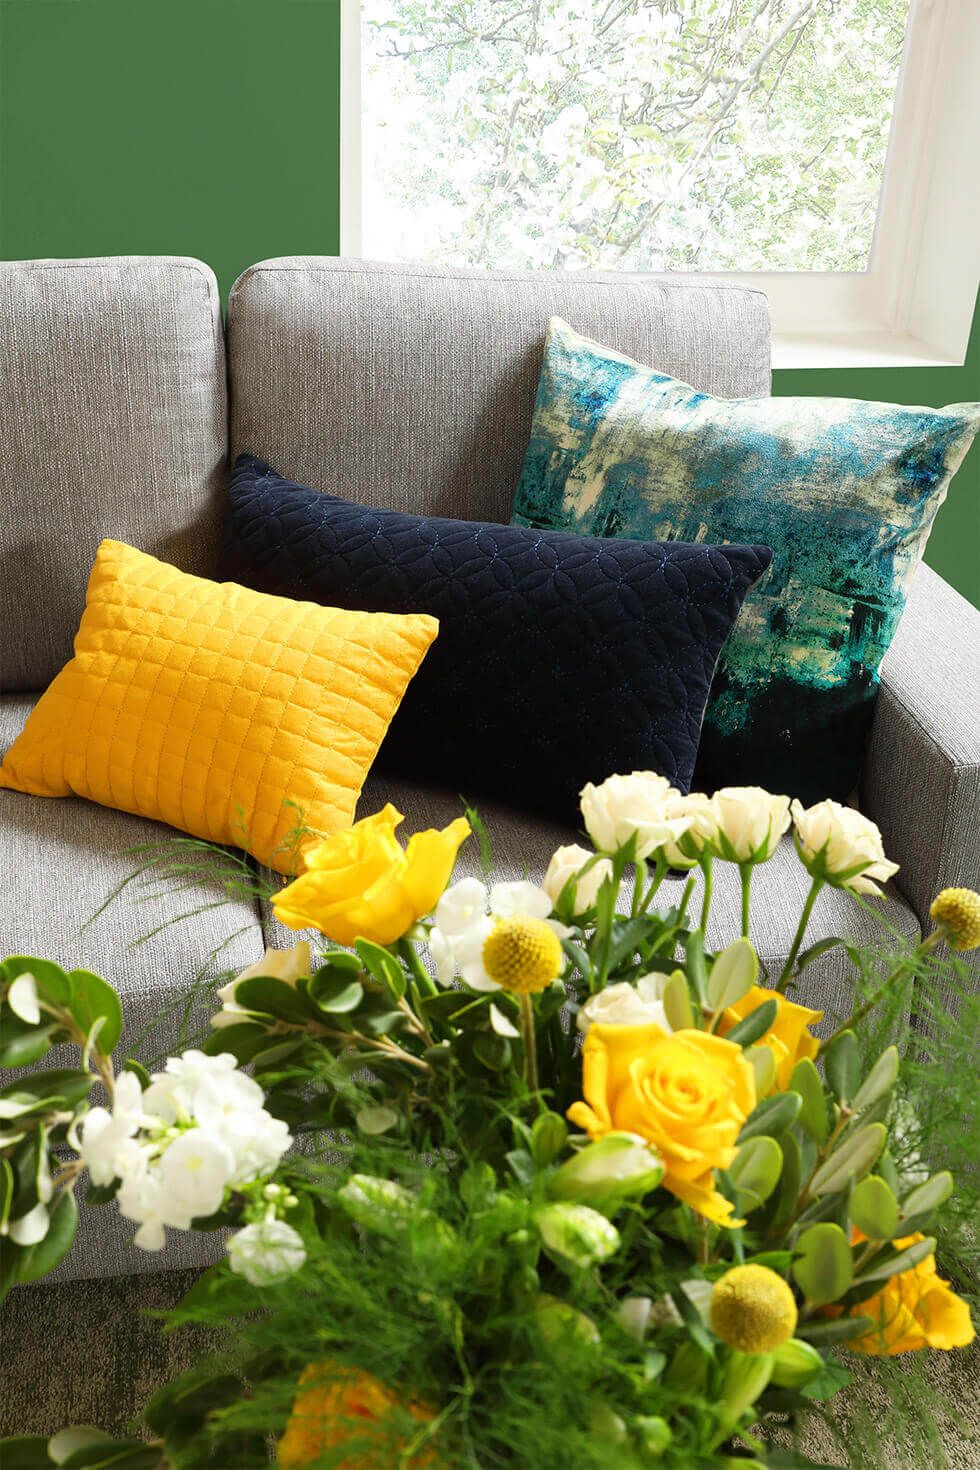 Colourful cushions and floral bouquet in the living room for spring